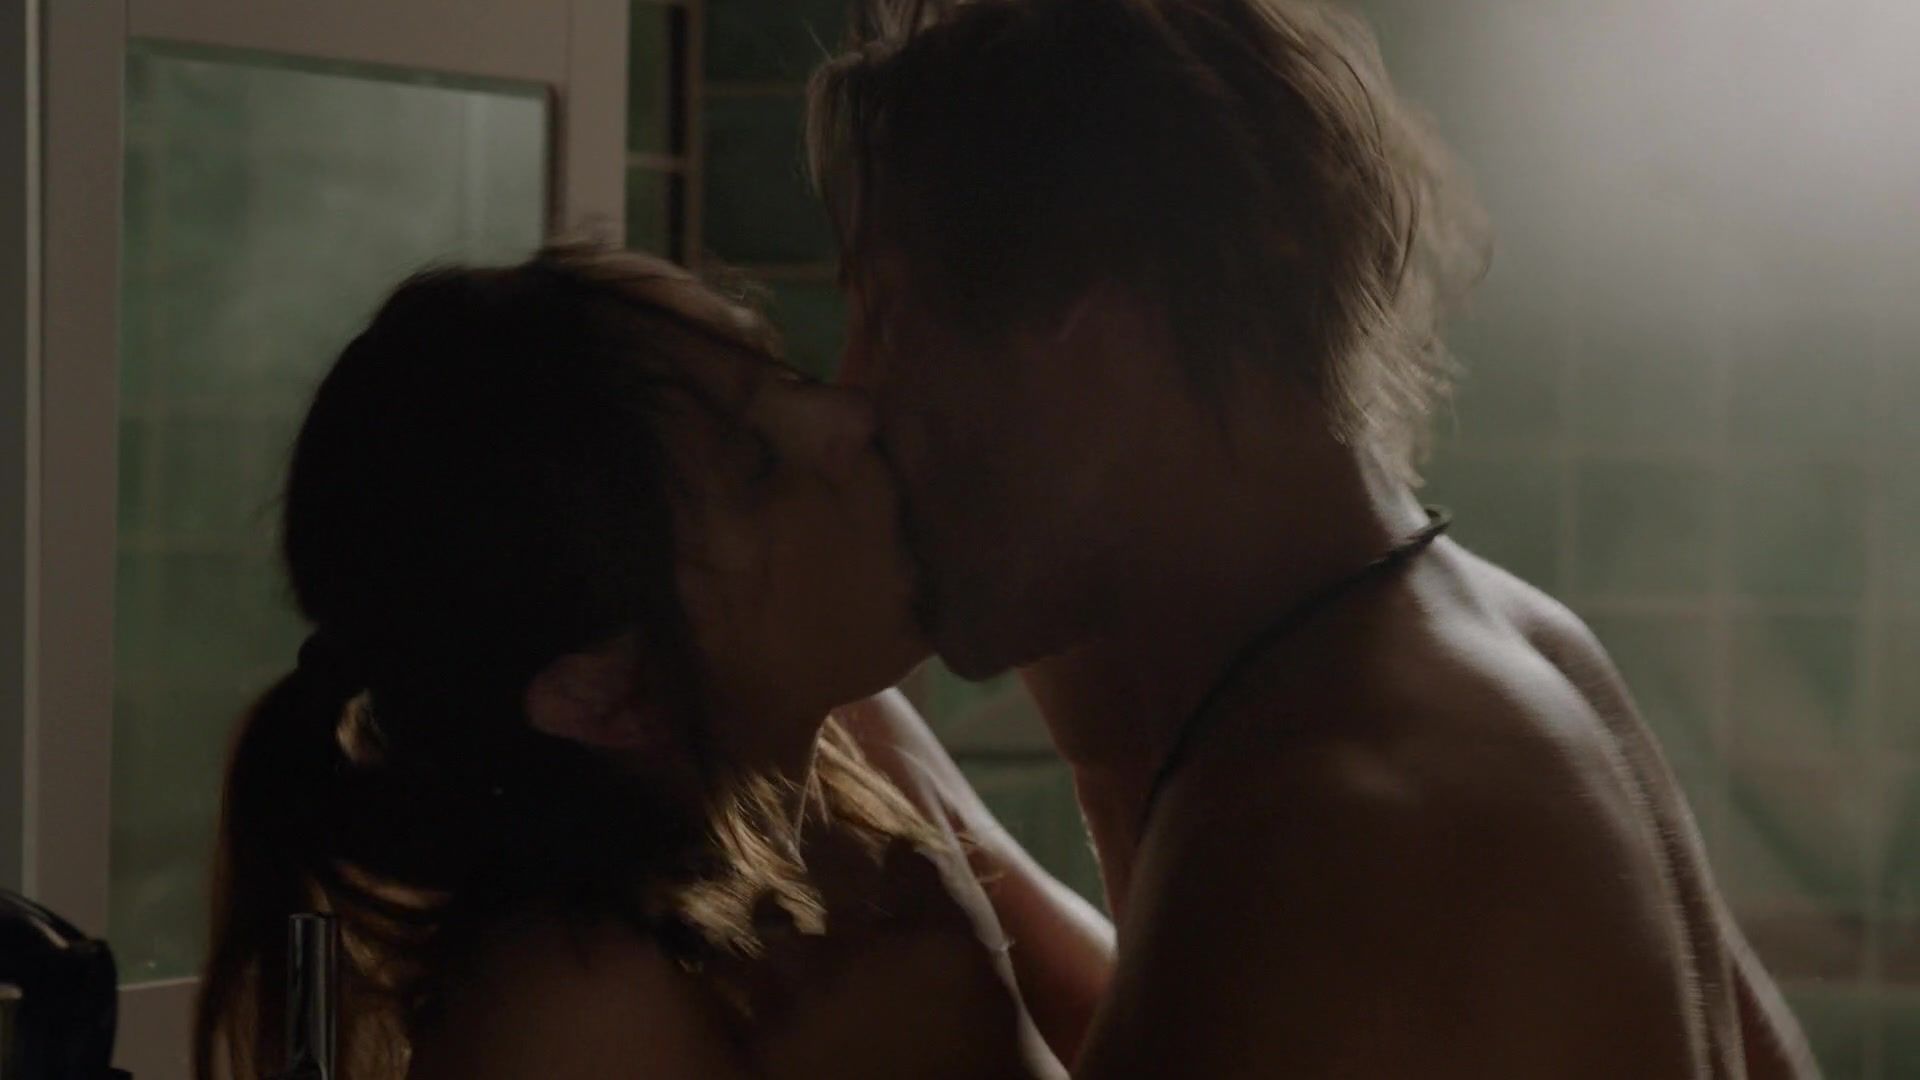 Amazing Naked Sarah Wayne Callies in Sex Scene from the TV show "Colony" s01e03 (2016) Gapes Gaping Asshole